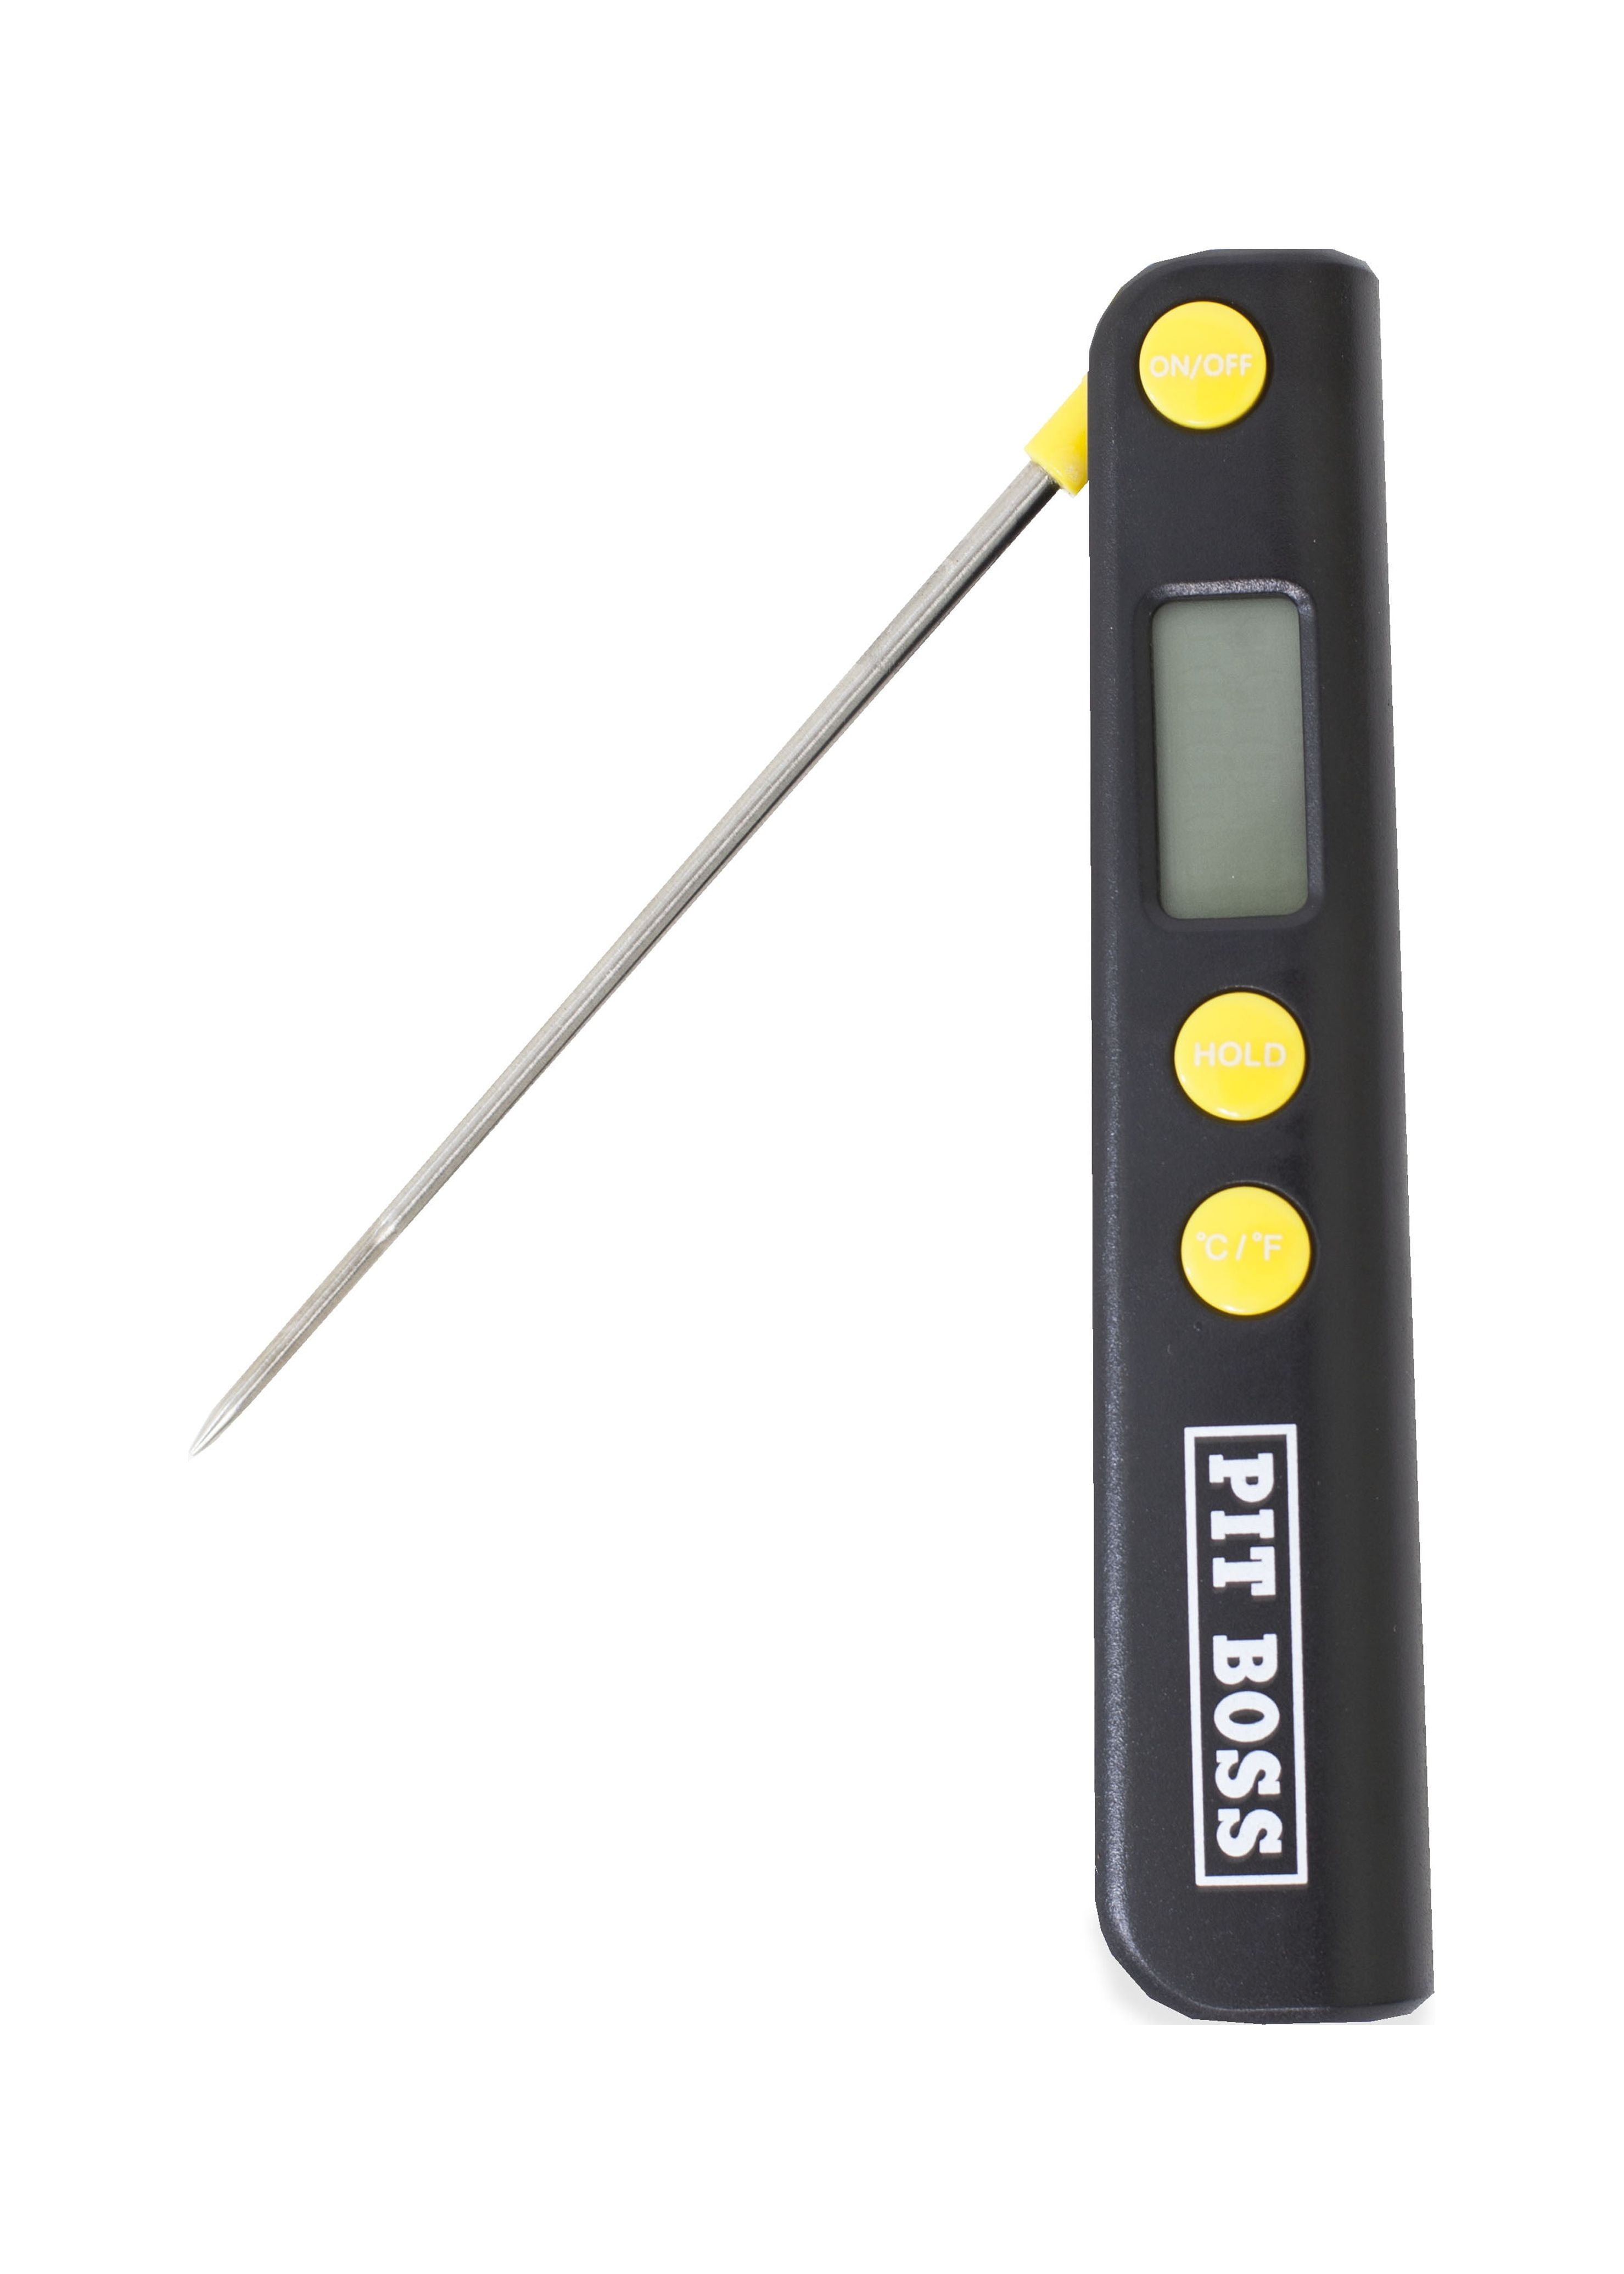 Pit Boss - Wireless Digital Meat Thermometer